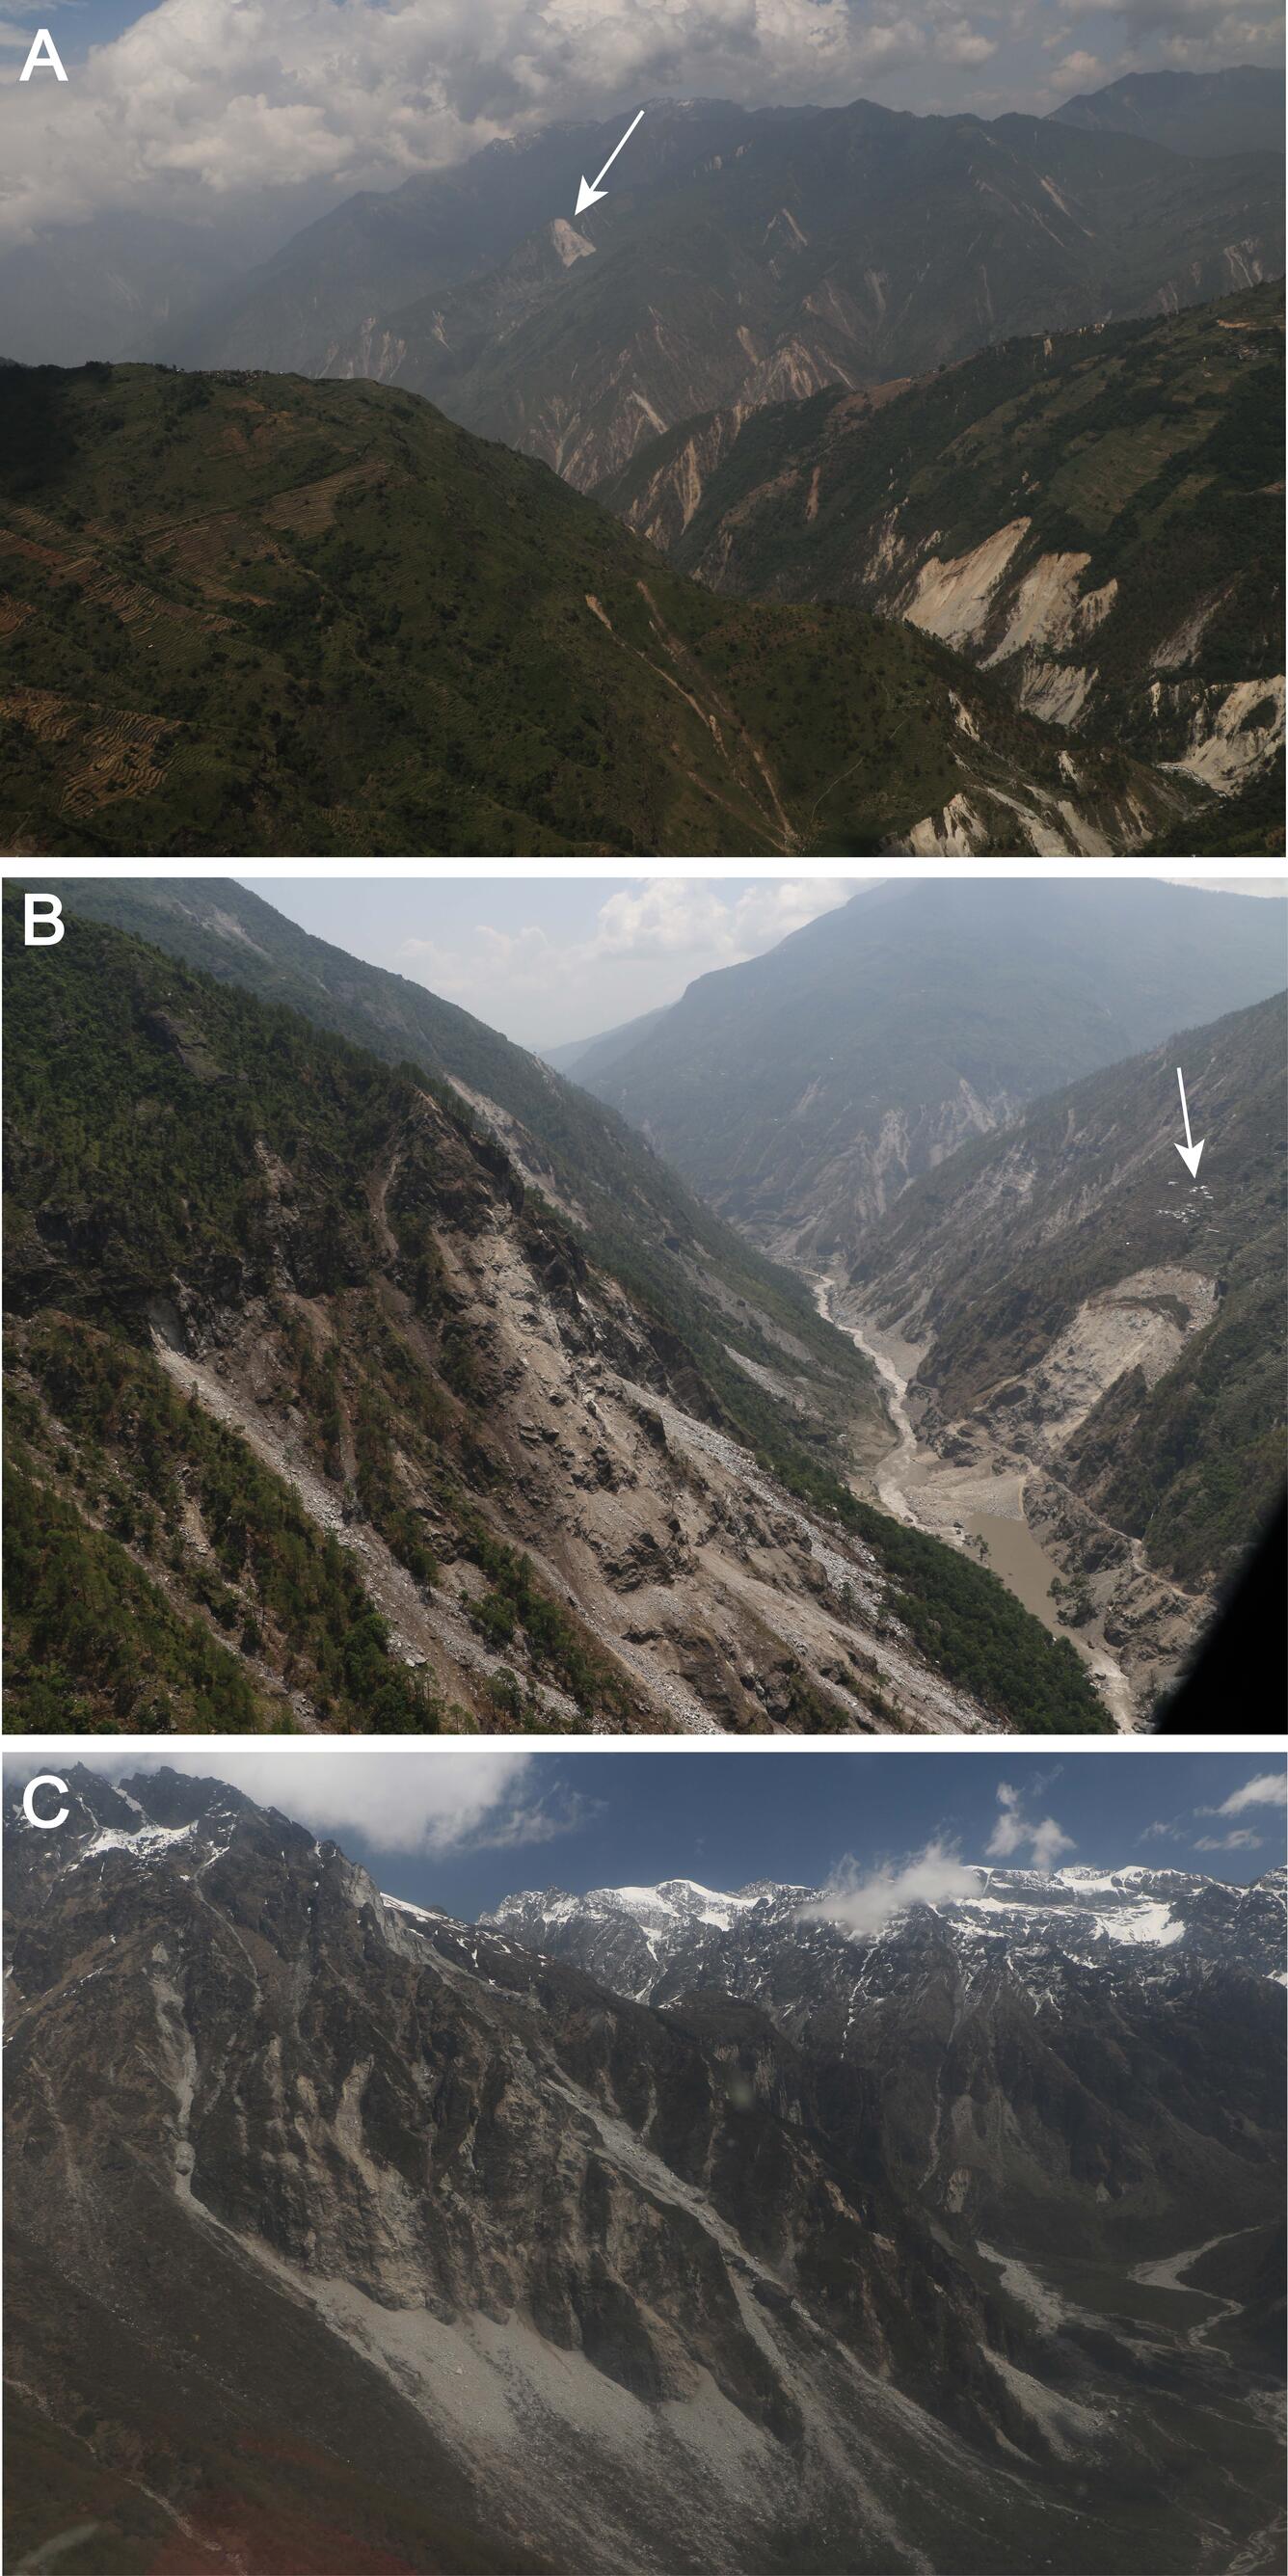 Aerial photographs showing landslides triggered by the April and May 2015 Gorkha earthquake sequence in central Nepal.